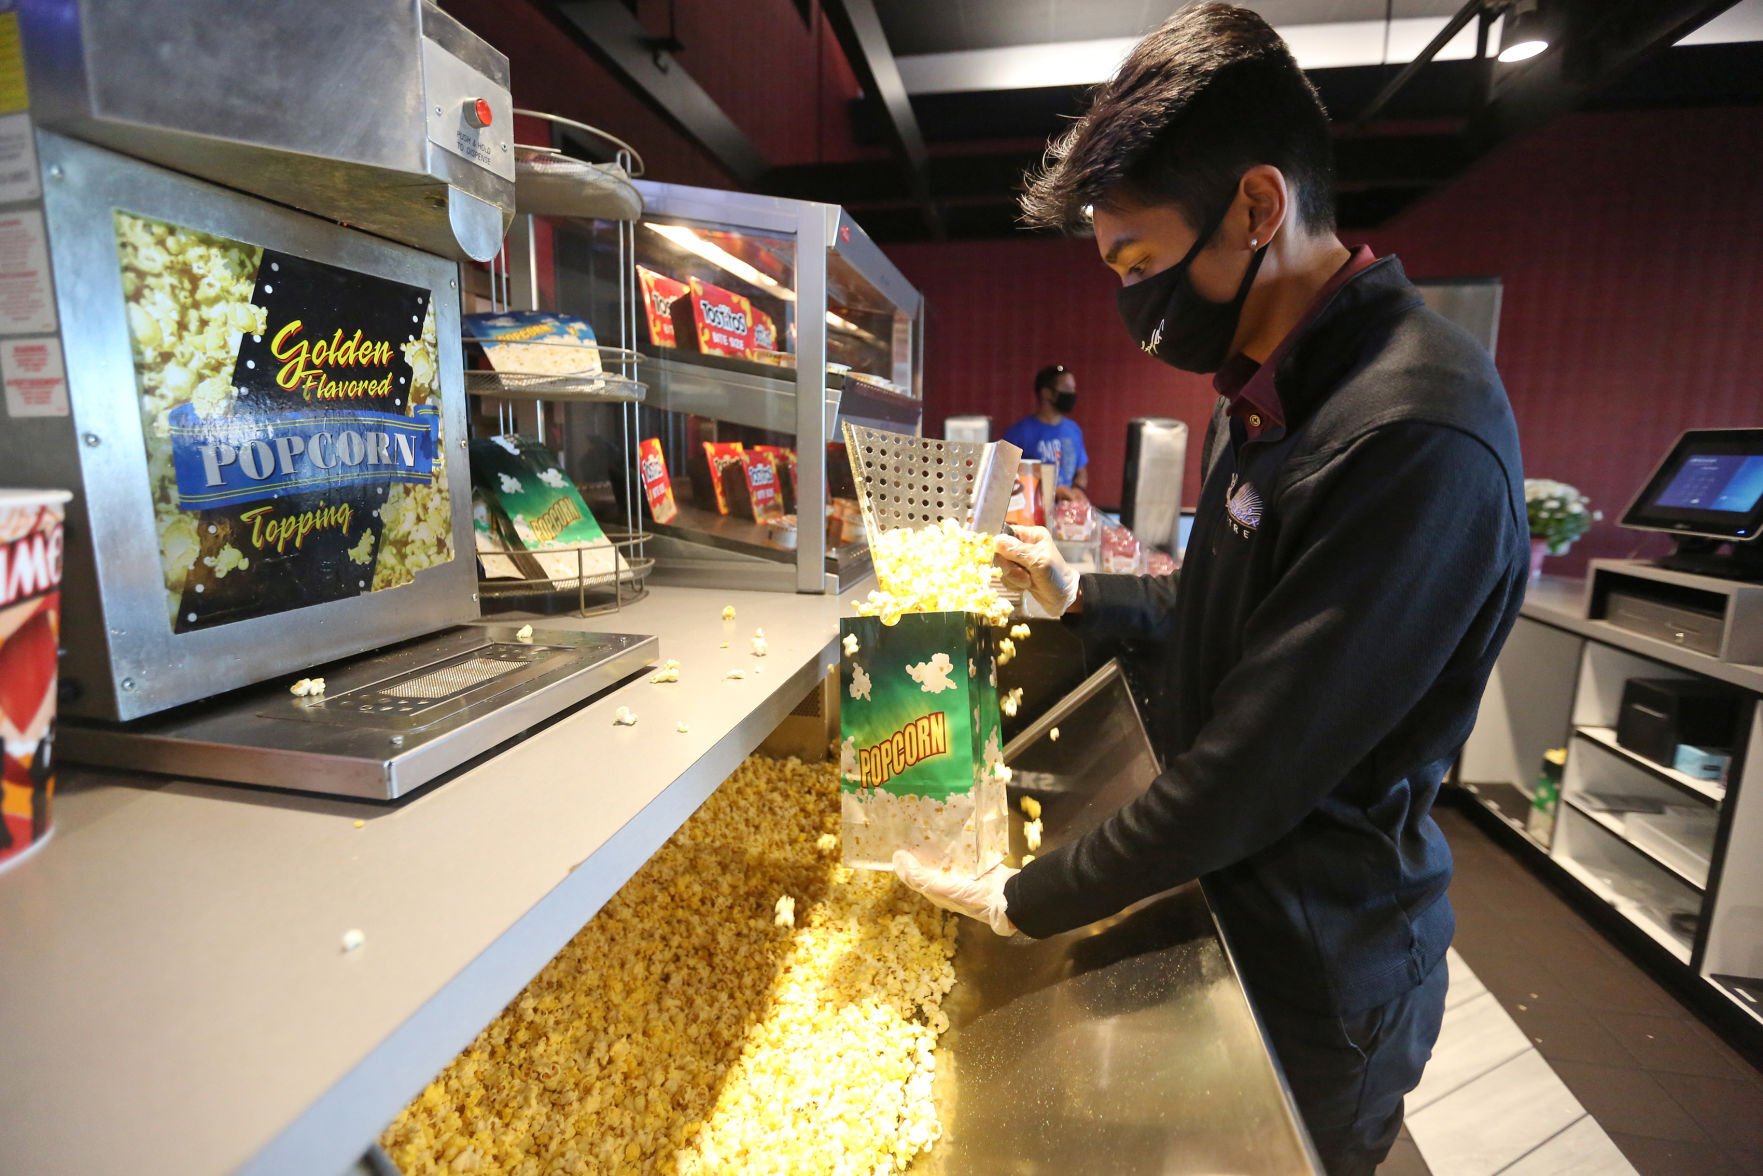 ChipperJosh Villanueva fills popcorn for a customer at Phoenix Theatres in Dubuque on Tuesday, Oct. 13, 2020. PHOTO CREDIT: JESSICA REILLY